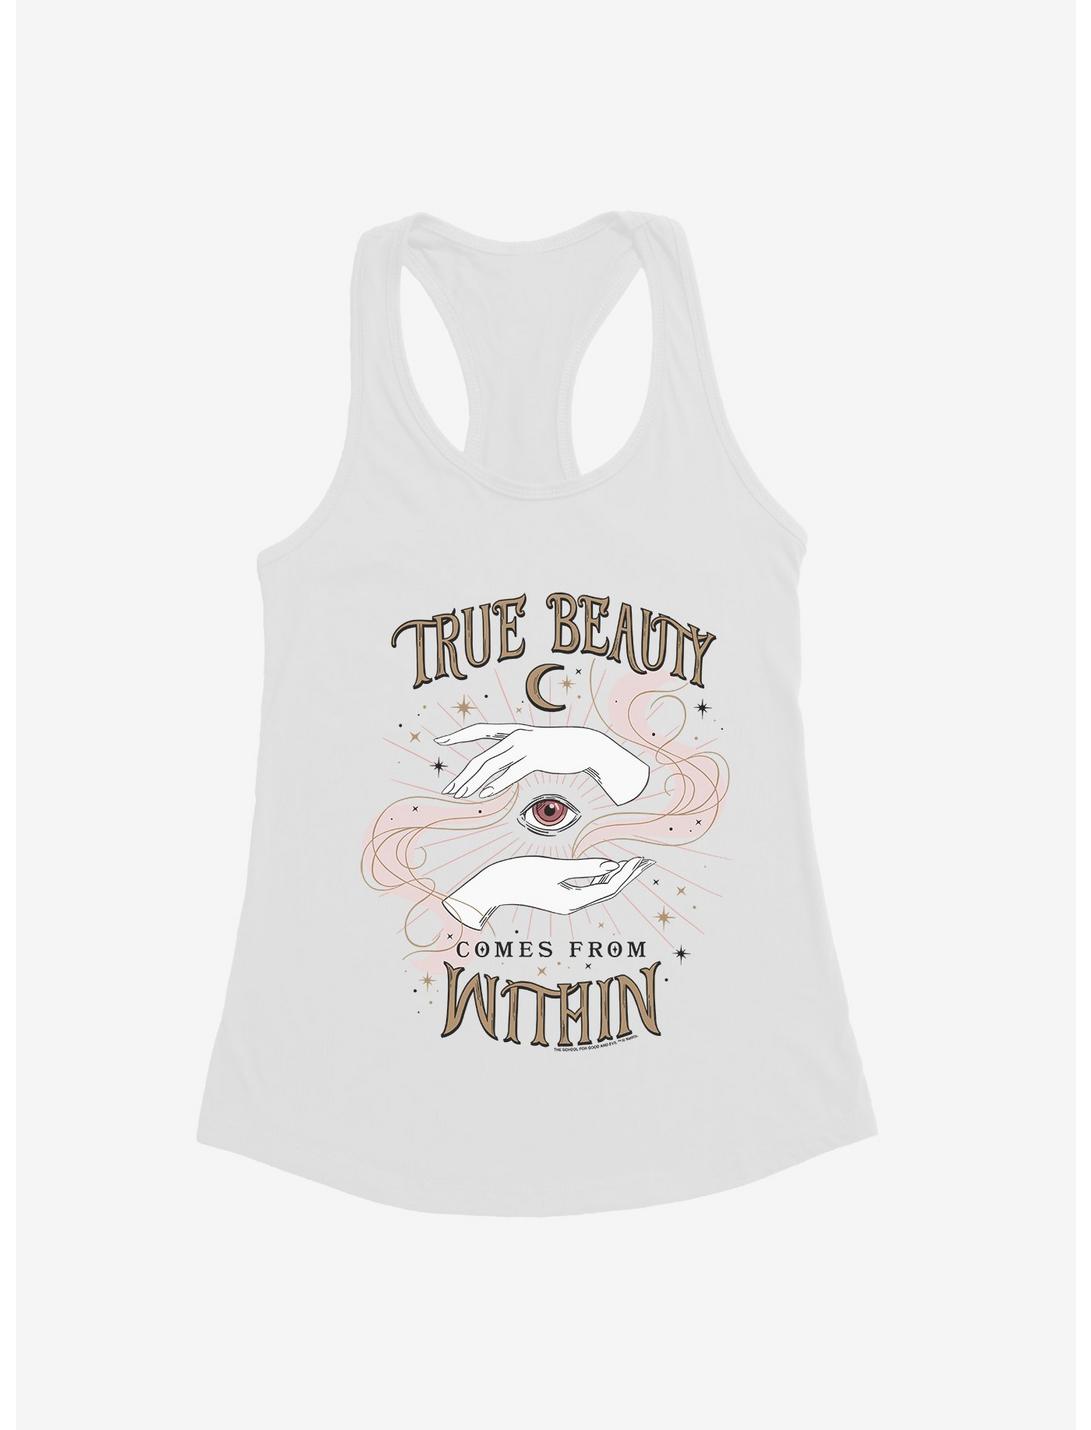 The School For Good And Evil True Beauty Girls Tank, WHITE, hi-res